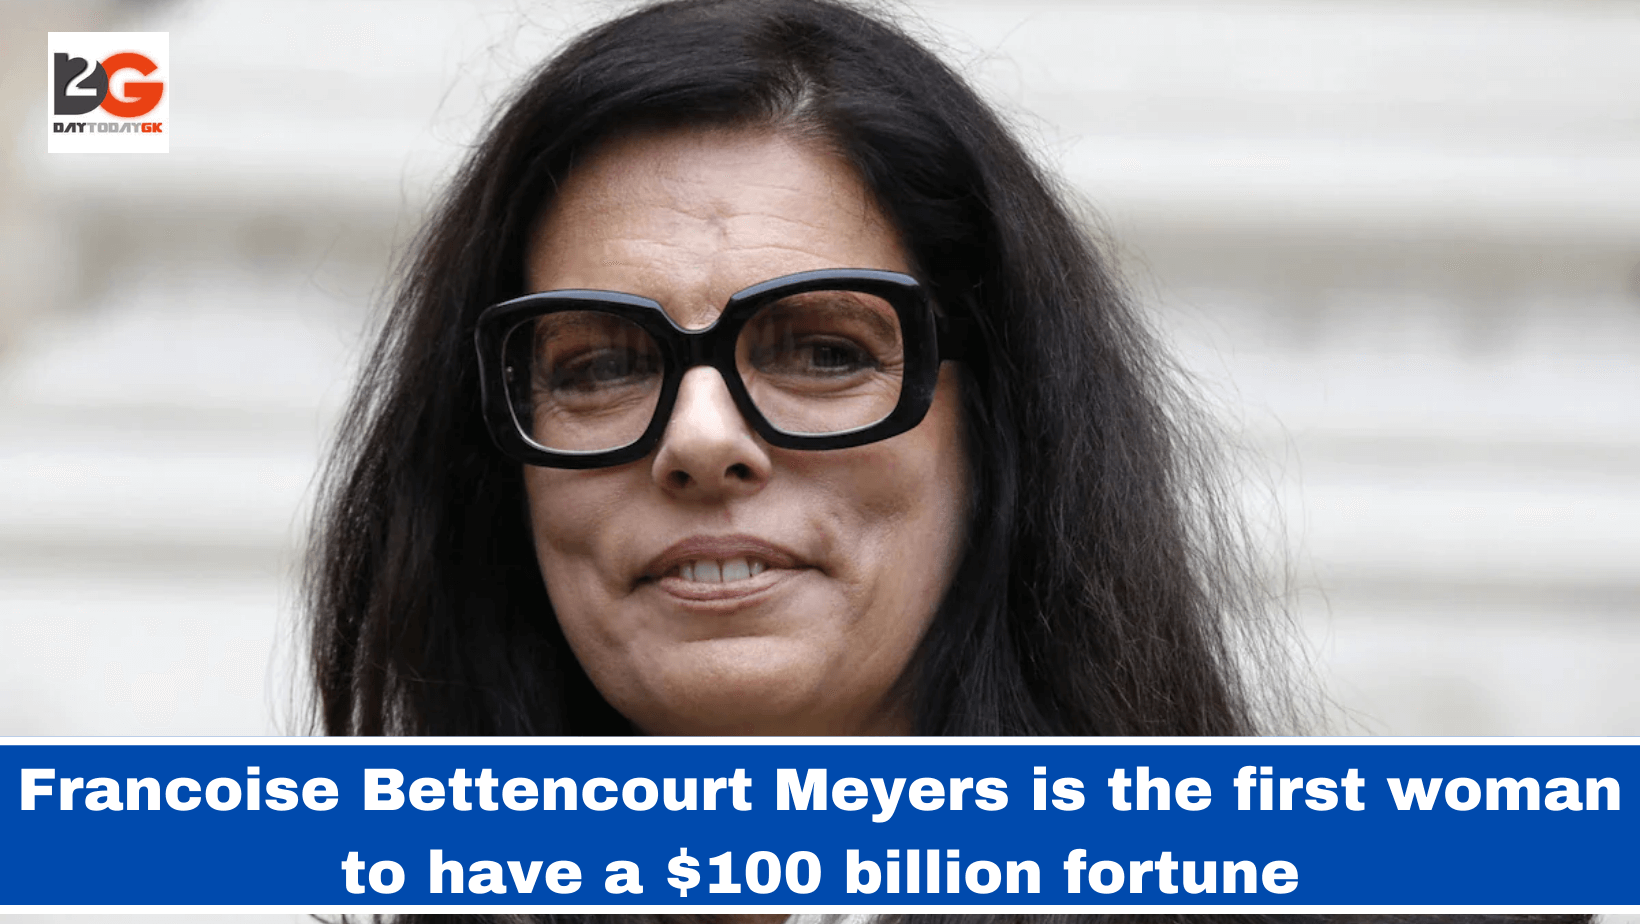 Francoise Bettencourt Meyers is the first woman to have a $100 billion fortune